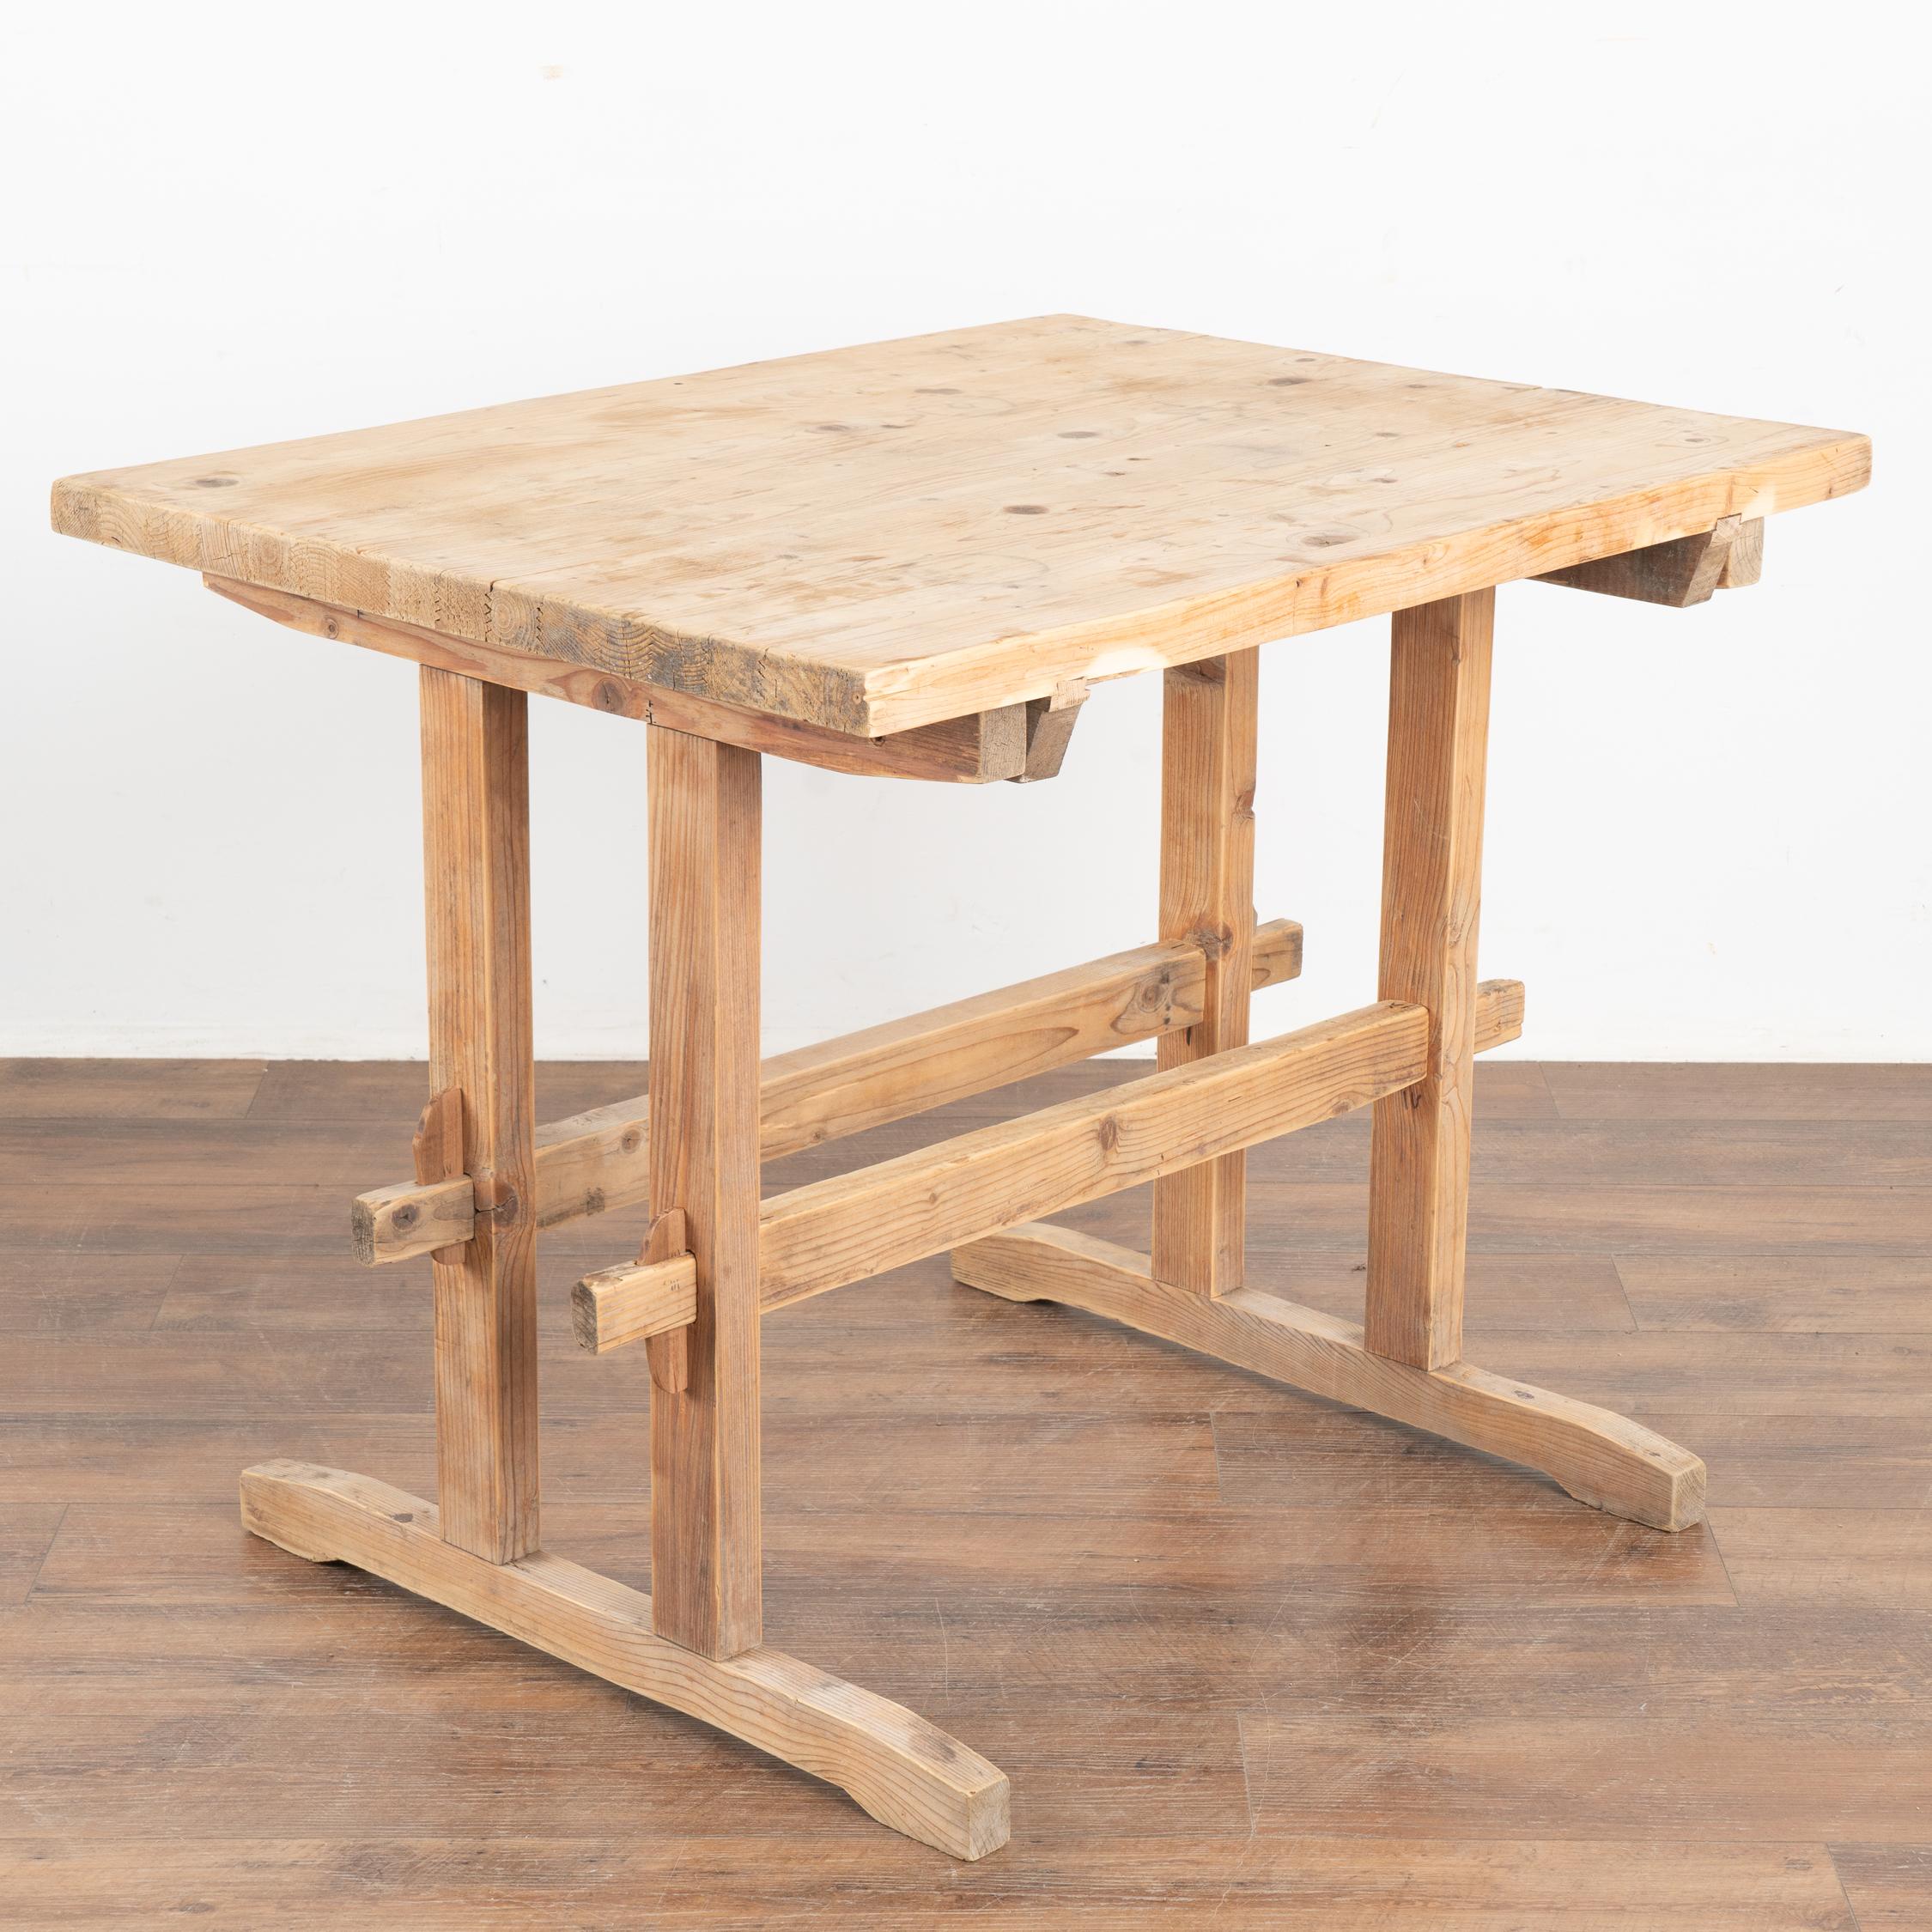 This wonderful old farm table from the European countryside will serve well as a rustic table in today's modern home.
This trestle table originally served as a  work table. Look at photos of the top to appreciate the scrapes, nicks and stains that